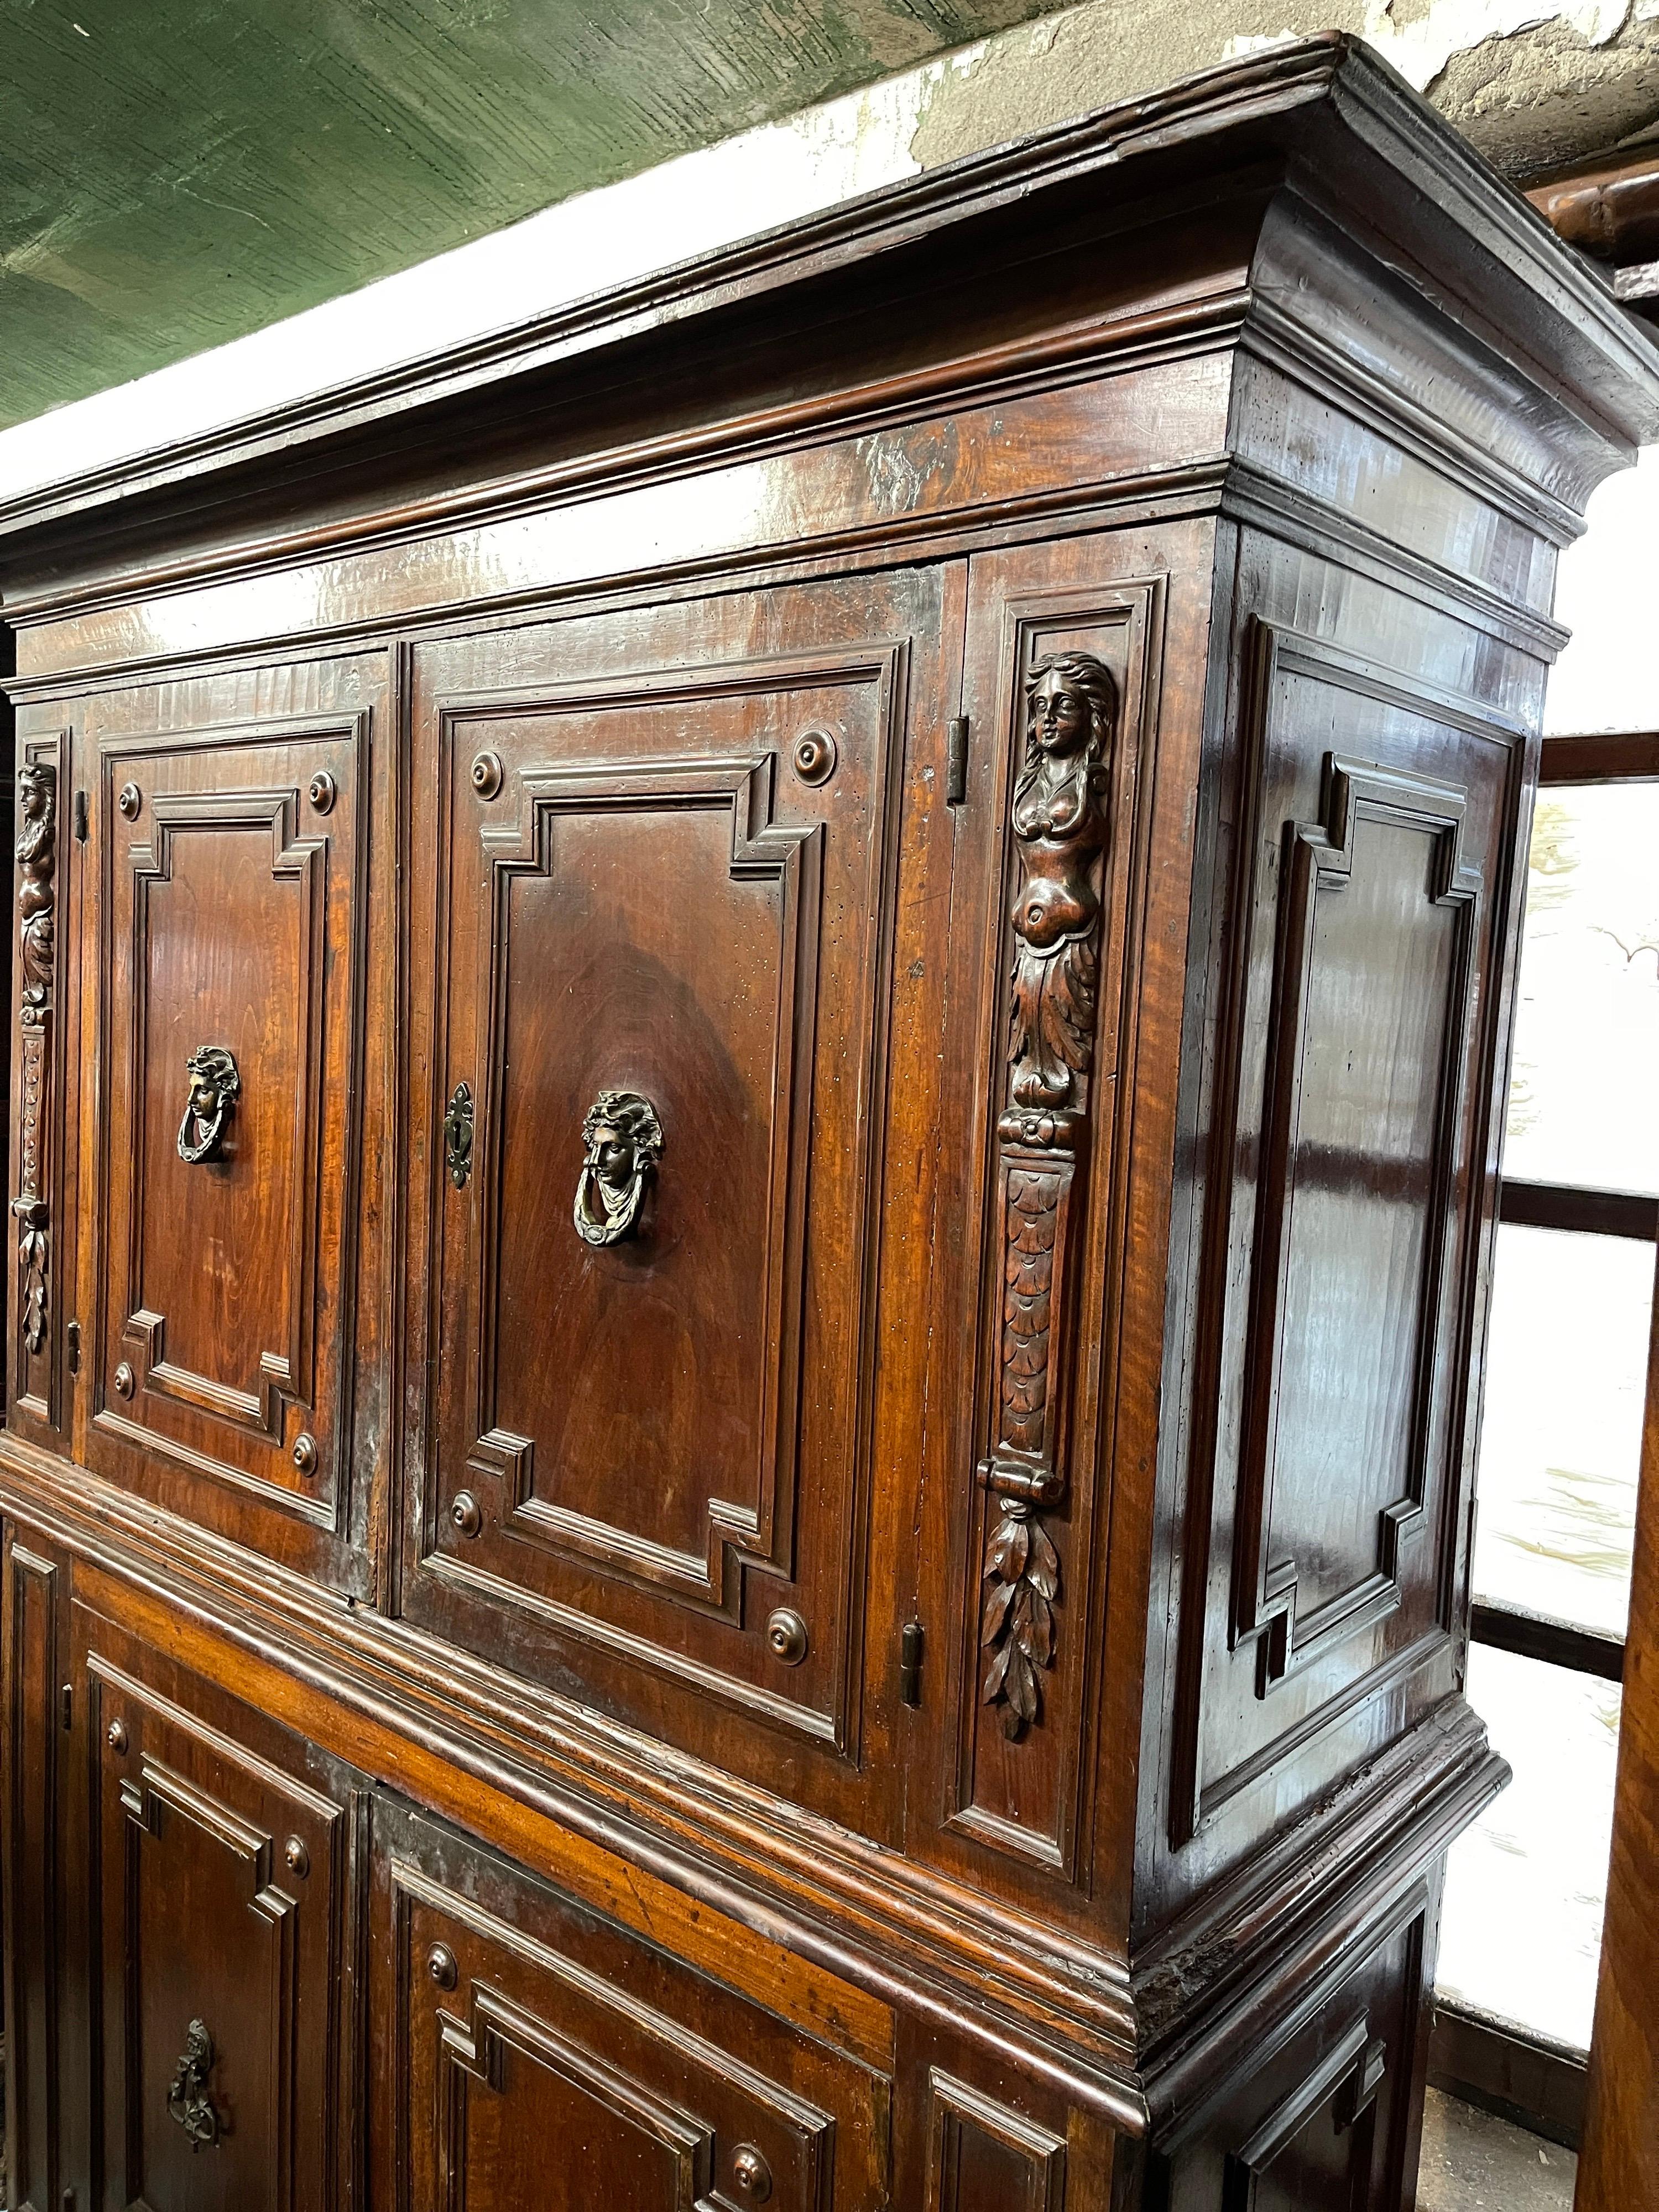 A walnut veneered two-section sideboard, Central Italy, probably city of Rome, beginning of the 17th century.
Double-bodied walnut cabinet, with upper molded frame surmounting a smooth architrave.
A second molded border separates the two elements